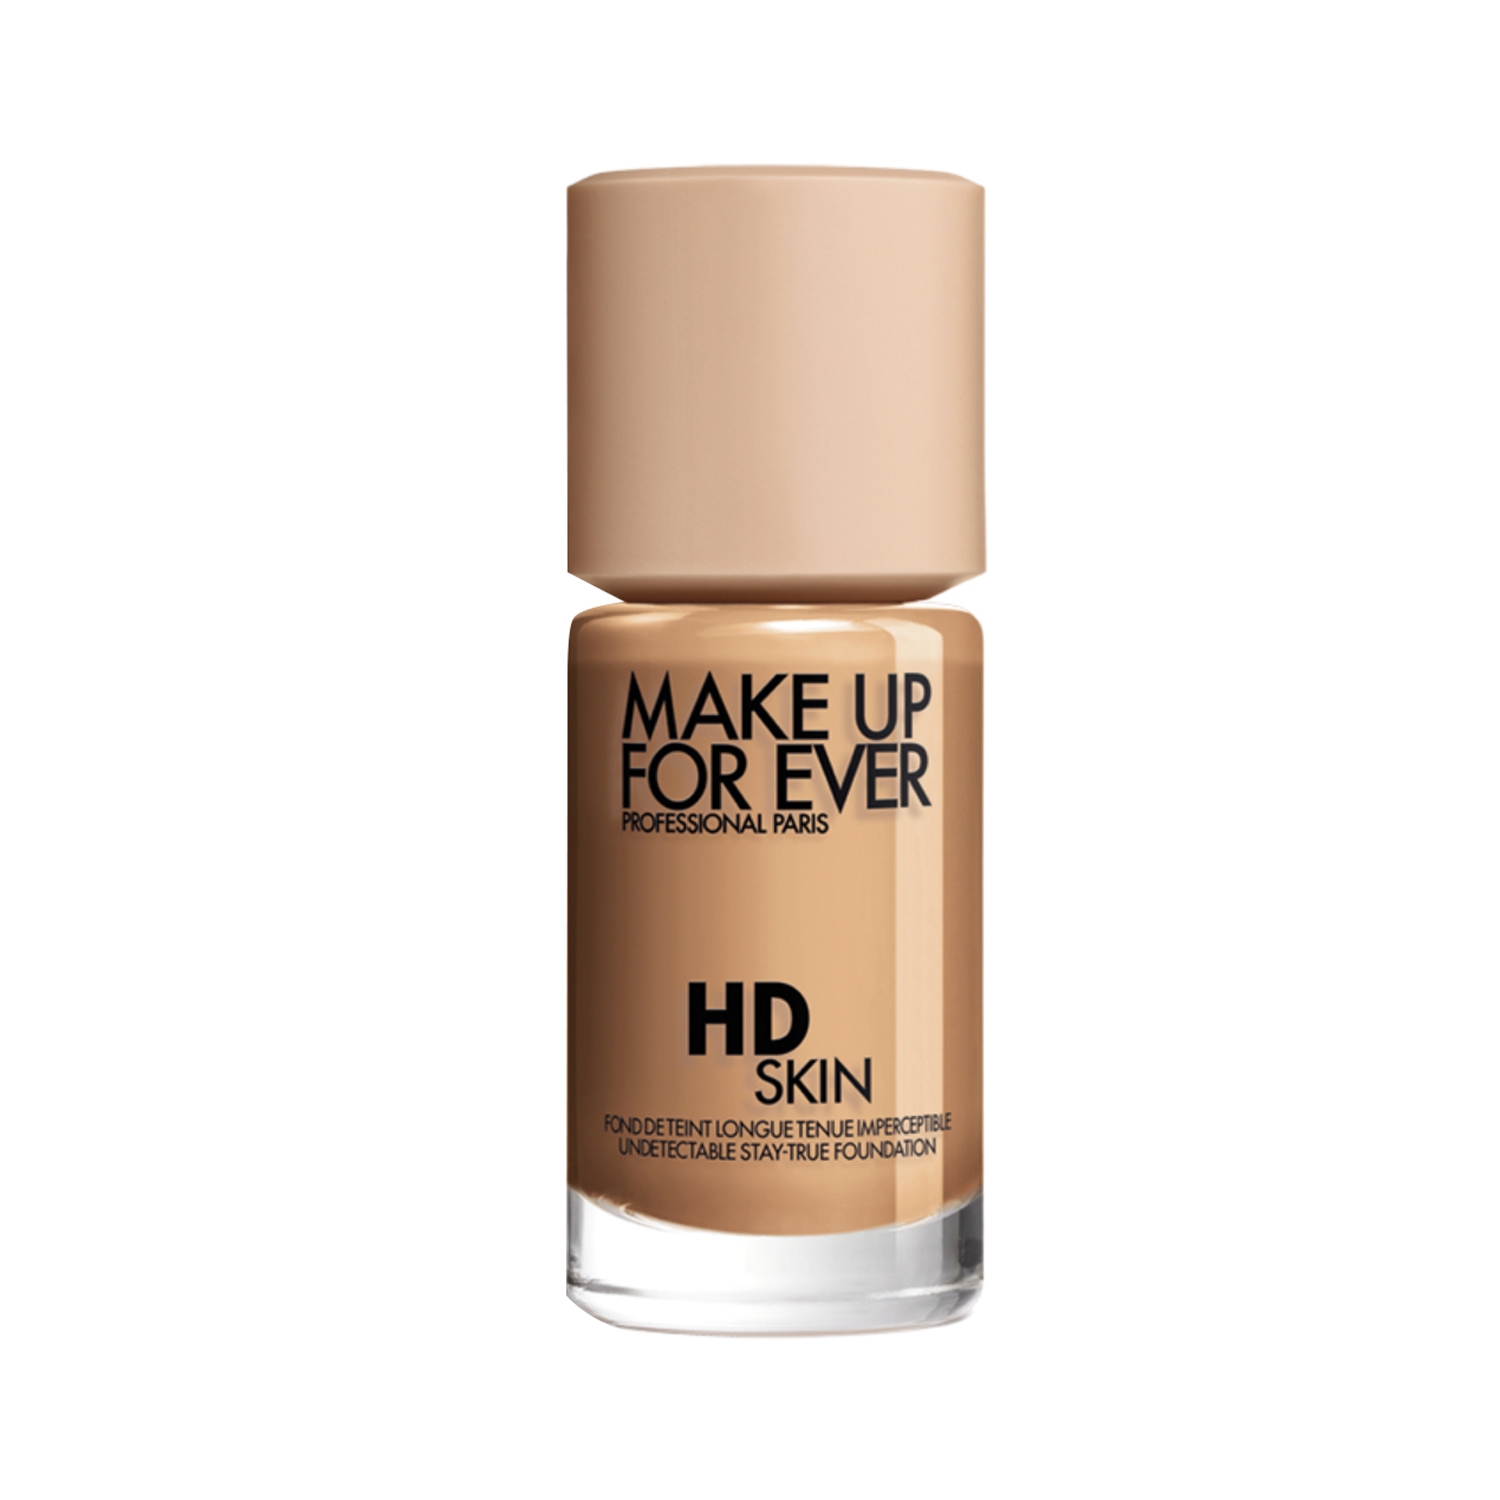 Make Up For Ever | Make Up For Ever Hd Skin Foundation-2Y36 (Y365) (30ml)